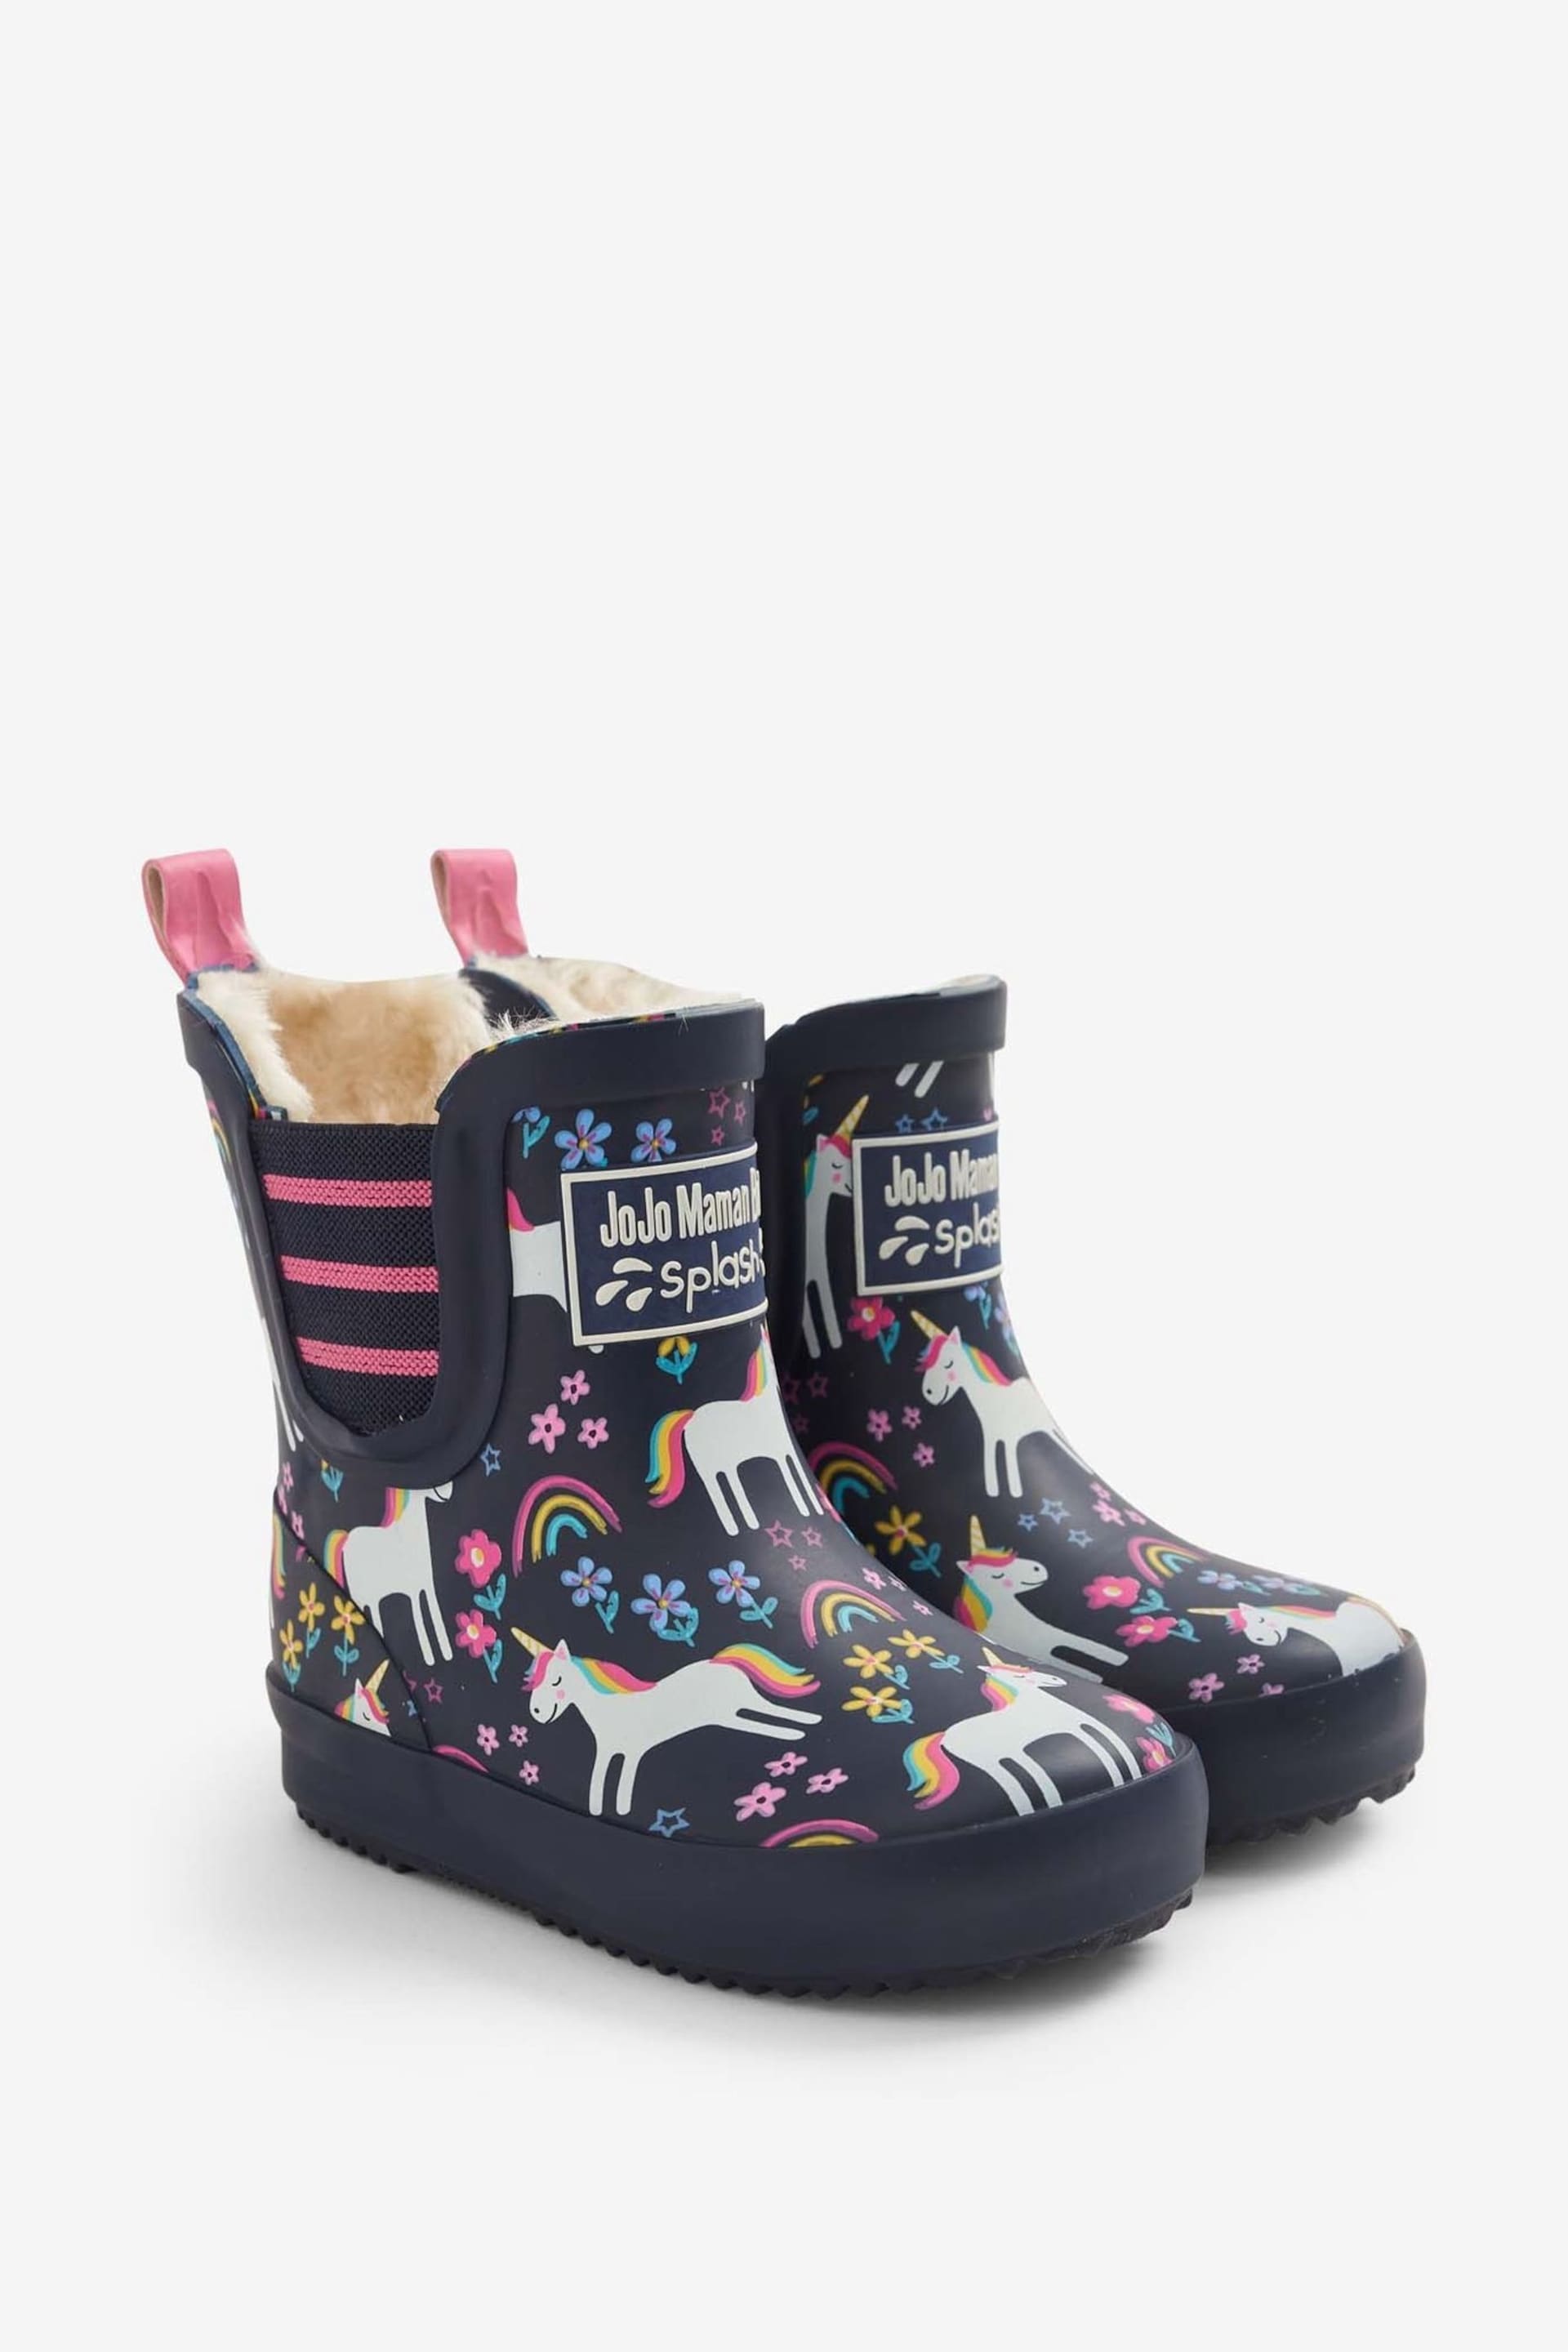 JoJo Maman Bébé Unicorn Cosy Lined Ankle Wellies - Image 1 of 3